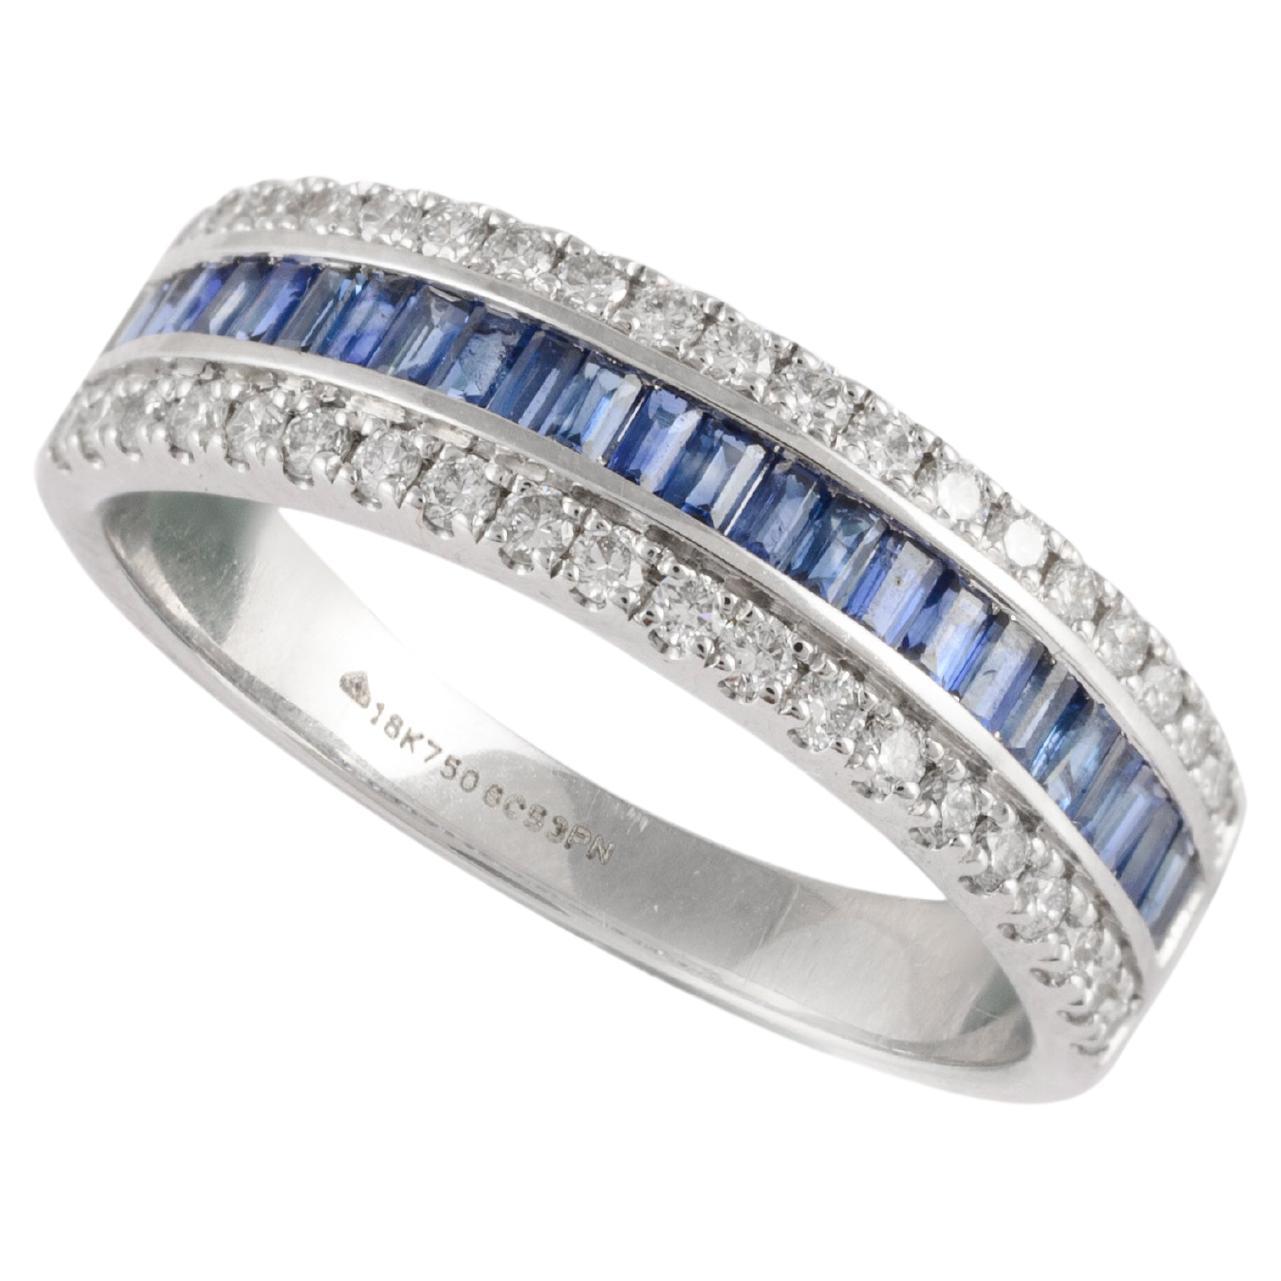 Natural Blue Sapphire Diamond Wedding Ring Crafted in 18k Solid White Gold